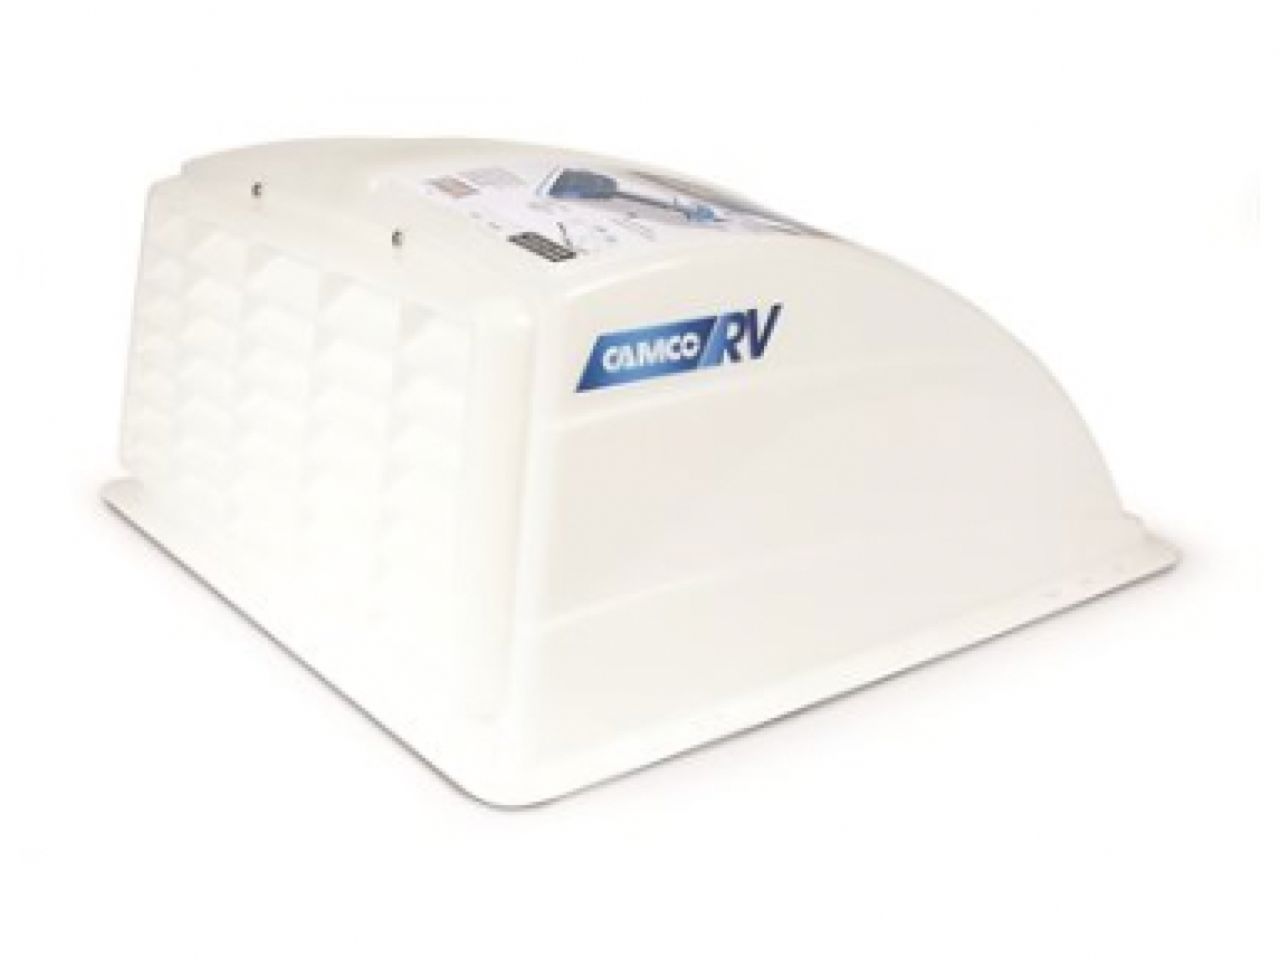 Camco  Vent Cover - White 10 pack Bilingual